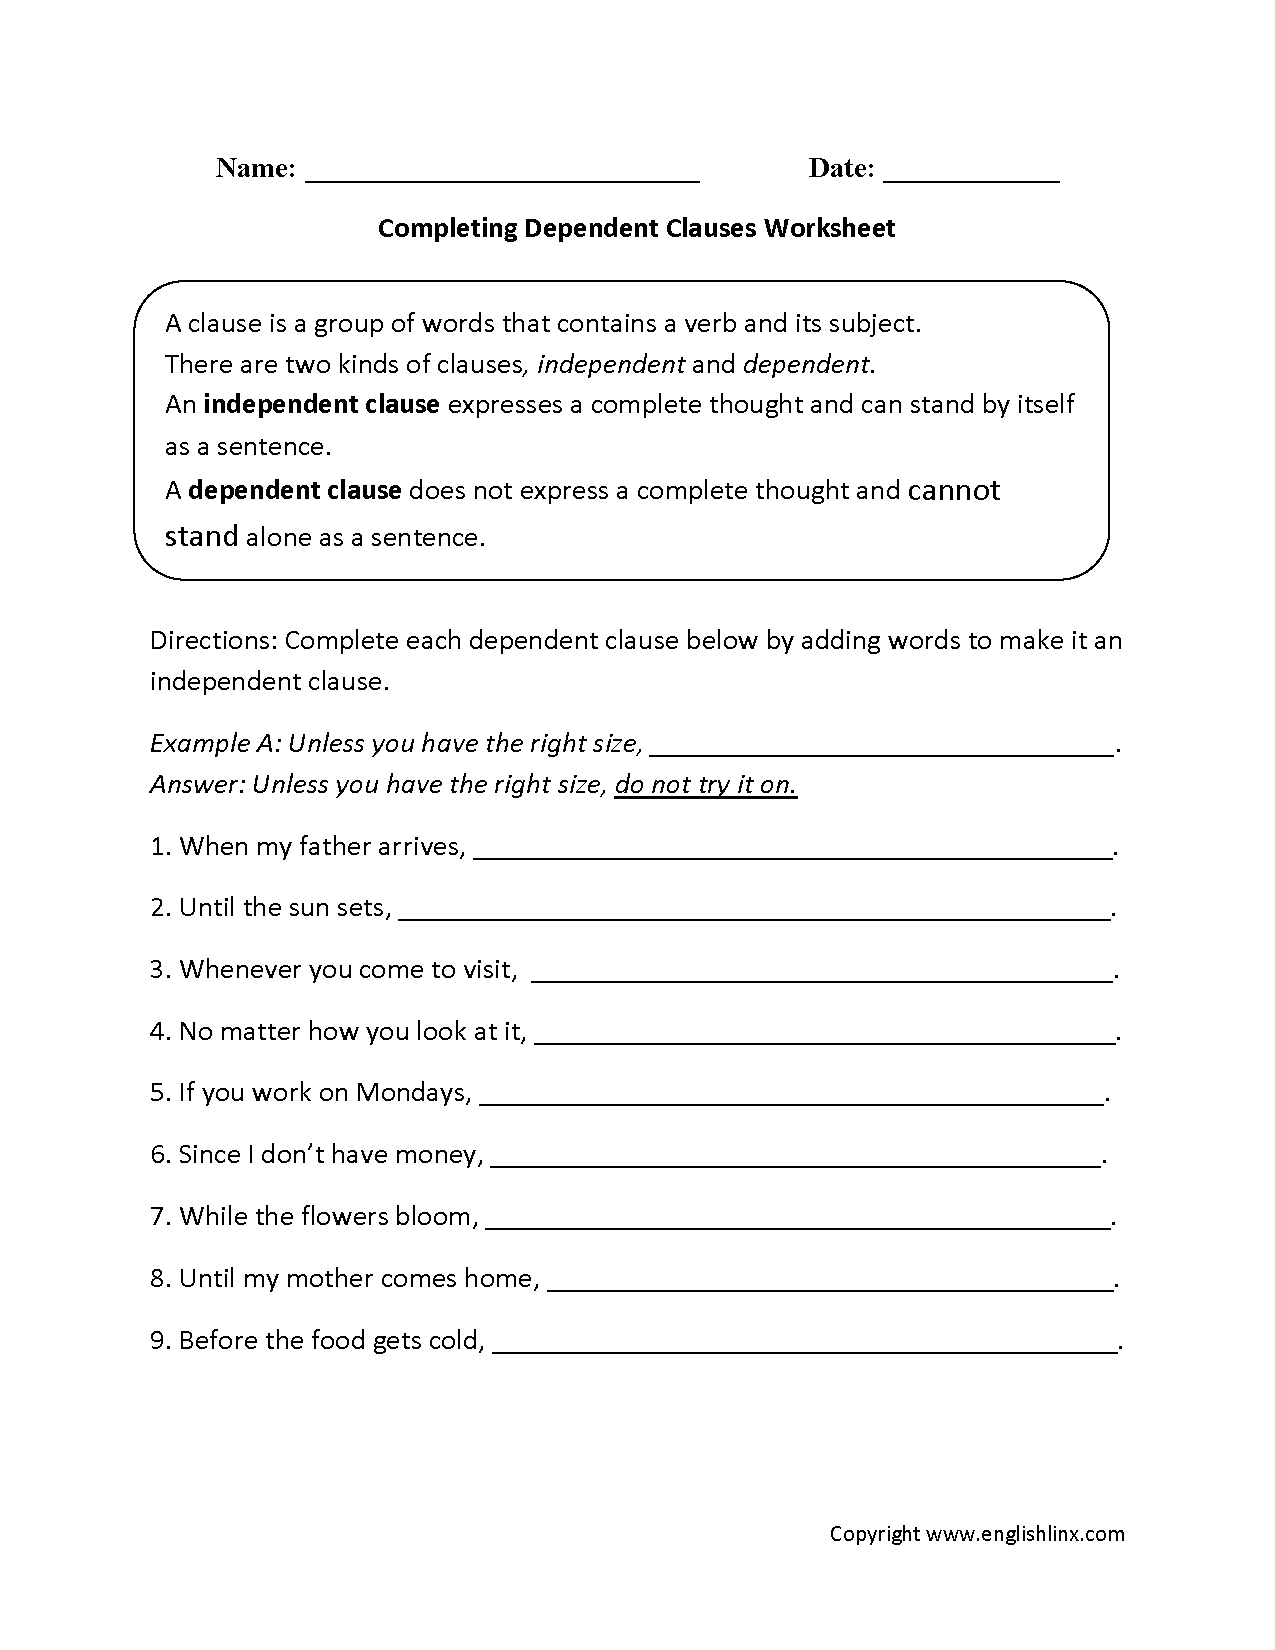 Clauses Worksheets  Completing Dependent Clauses Worksheet